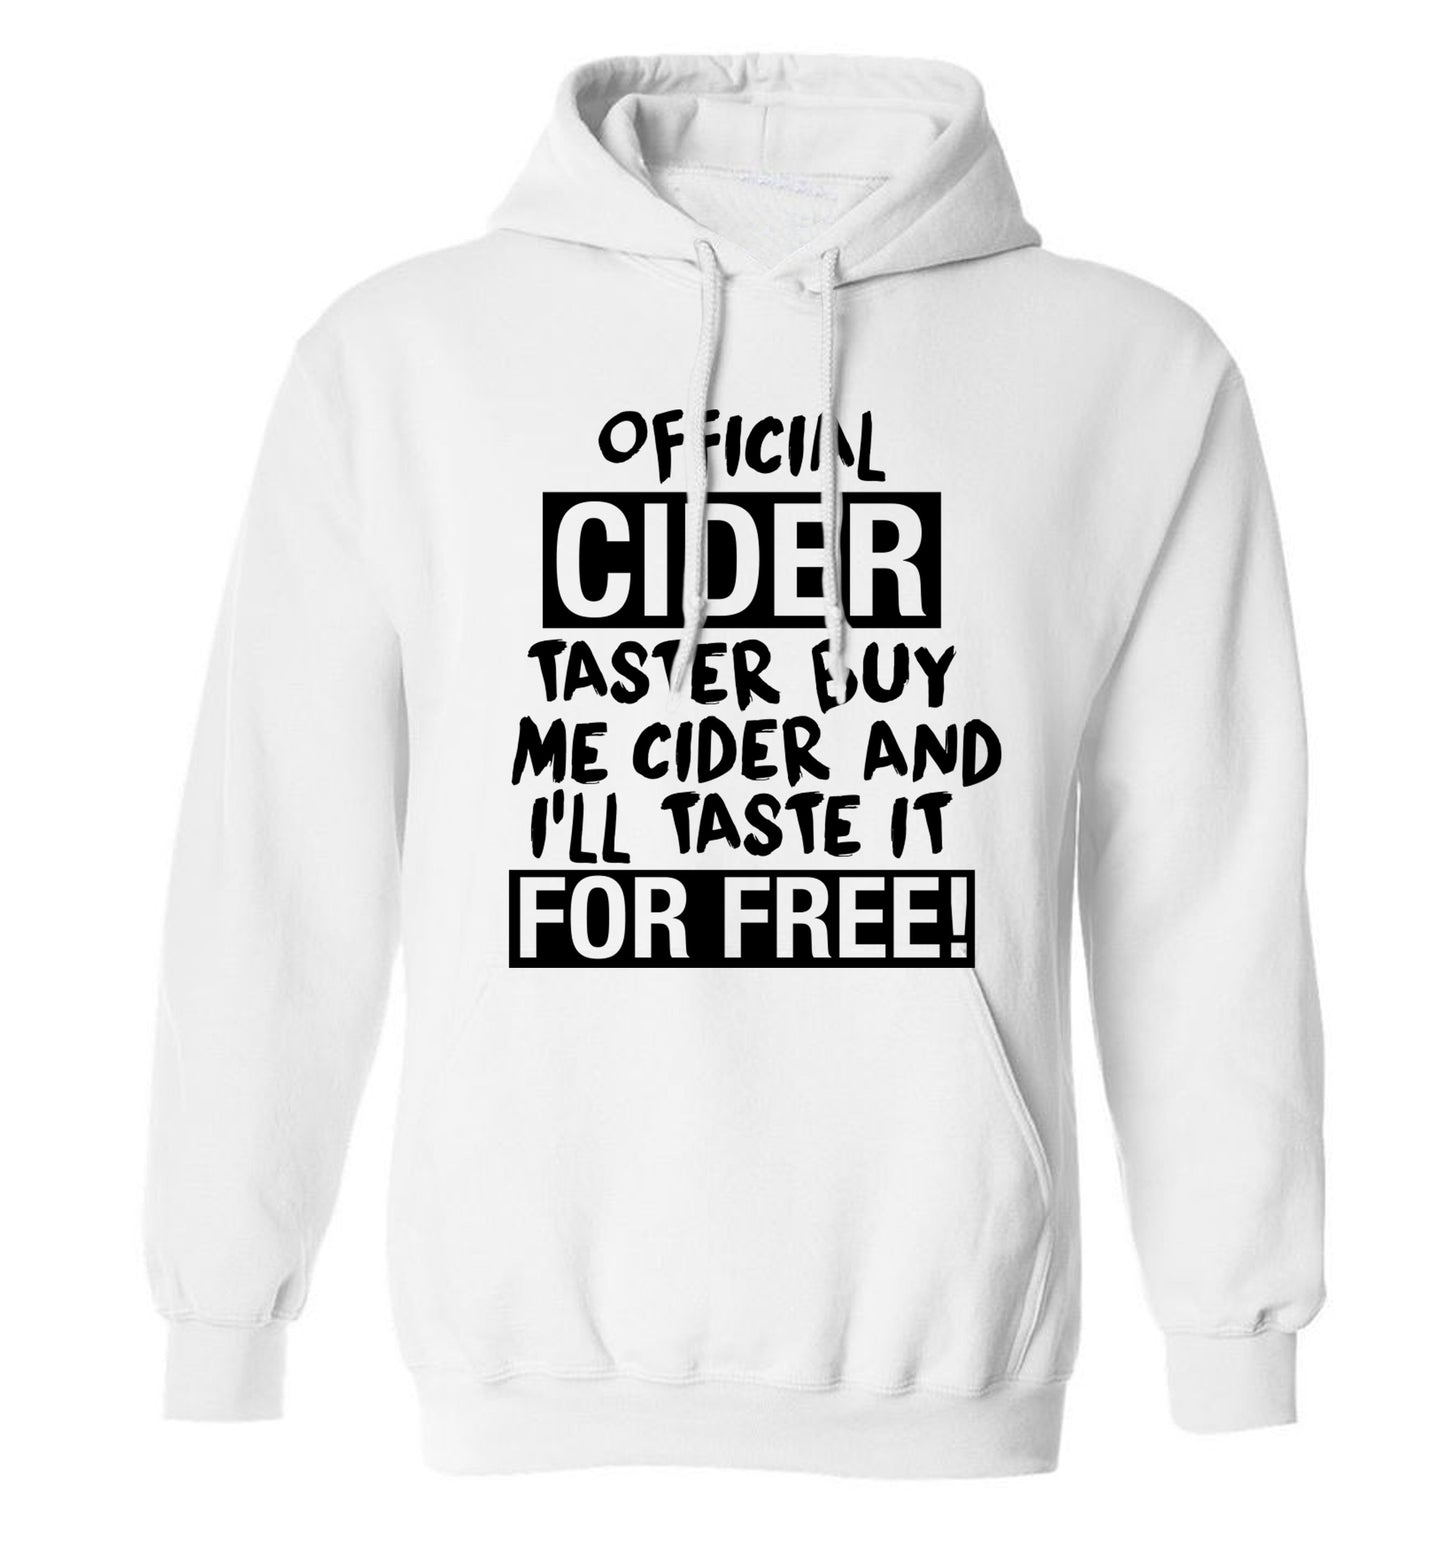 Official cider taster buy me cider and I'll taste it for free! adults unisex white hoodie 2XL